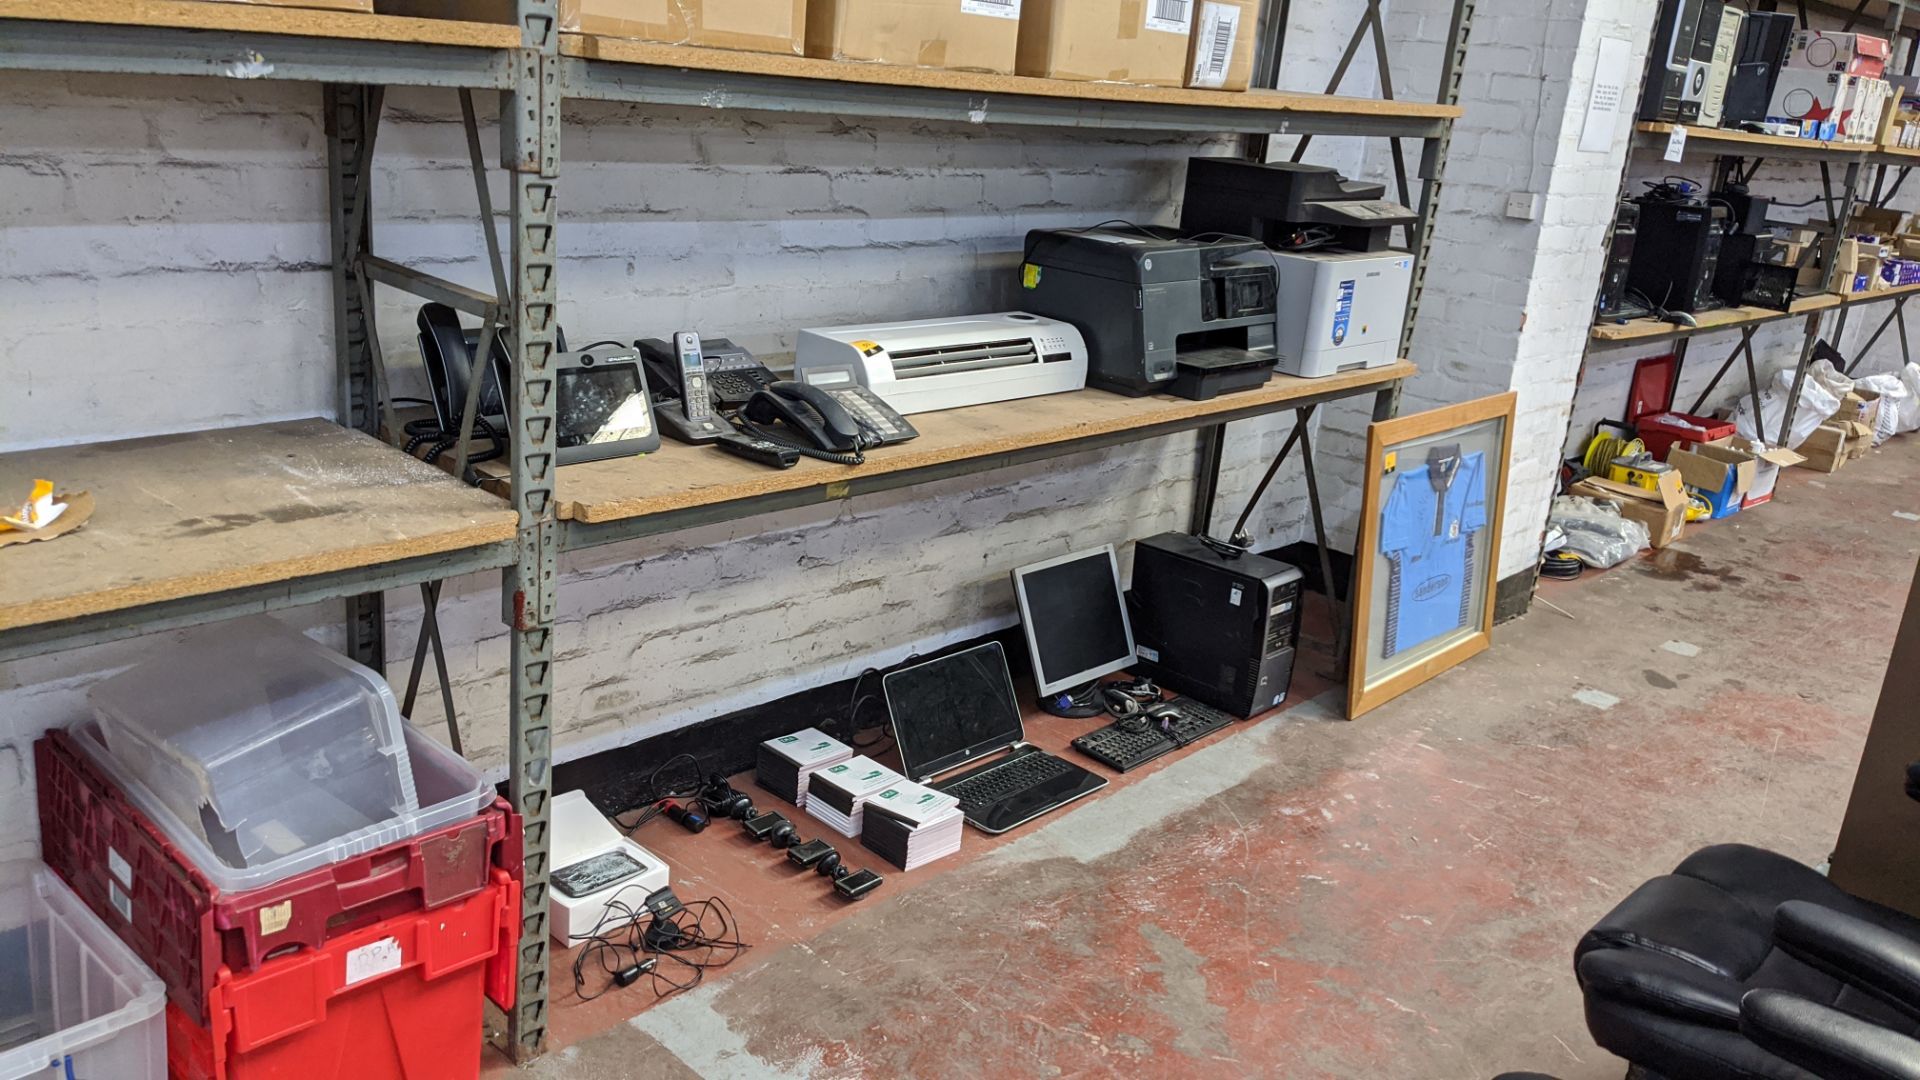 Contents of 2 shelves of assorted IT equipment including telephones, printers, computers, dash cams,